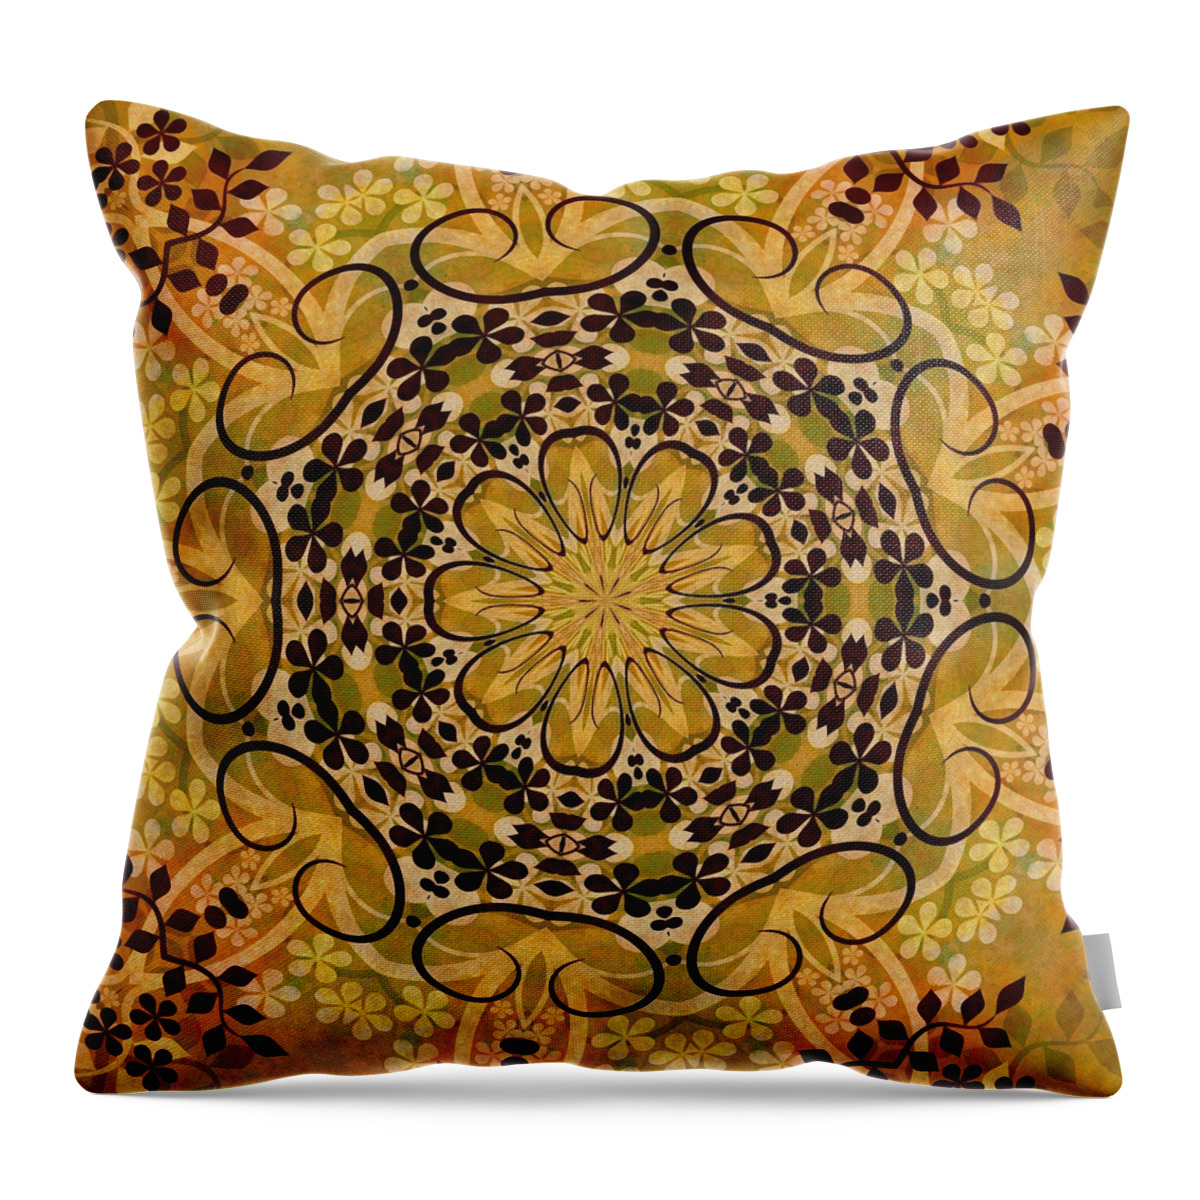 Intricate Throw Pillow featuring the mixed media Ornamental 1 Version 3 Medallion by Angelina Tamez